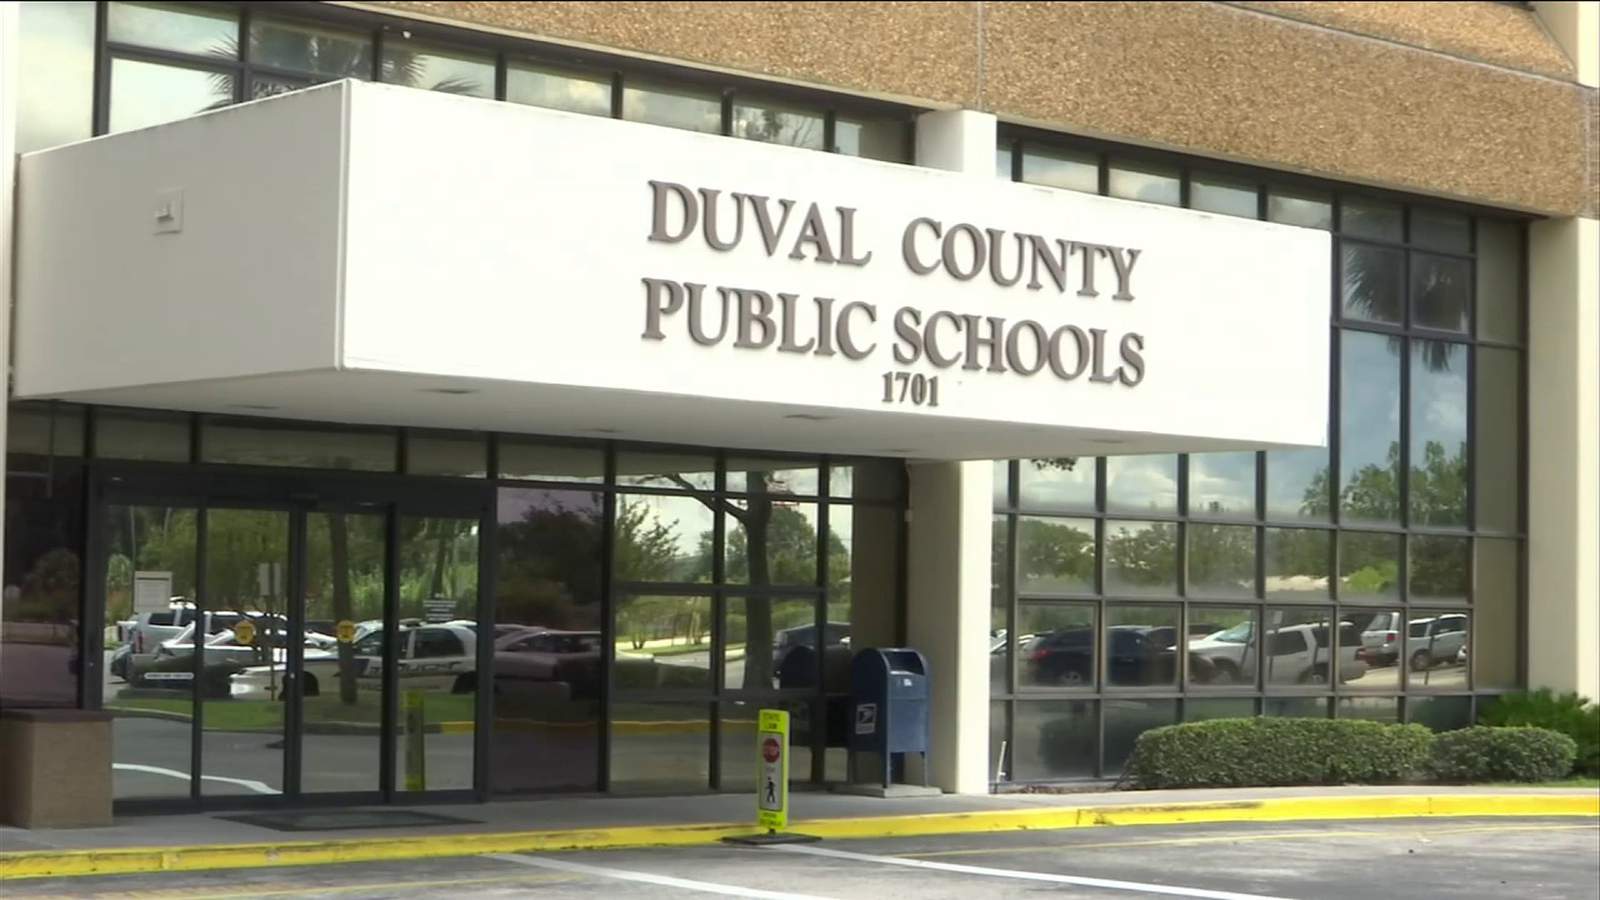 Independent audit of Duval County’s proposed half-cent school tax shows all criteria met or ‘partially met’